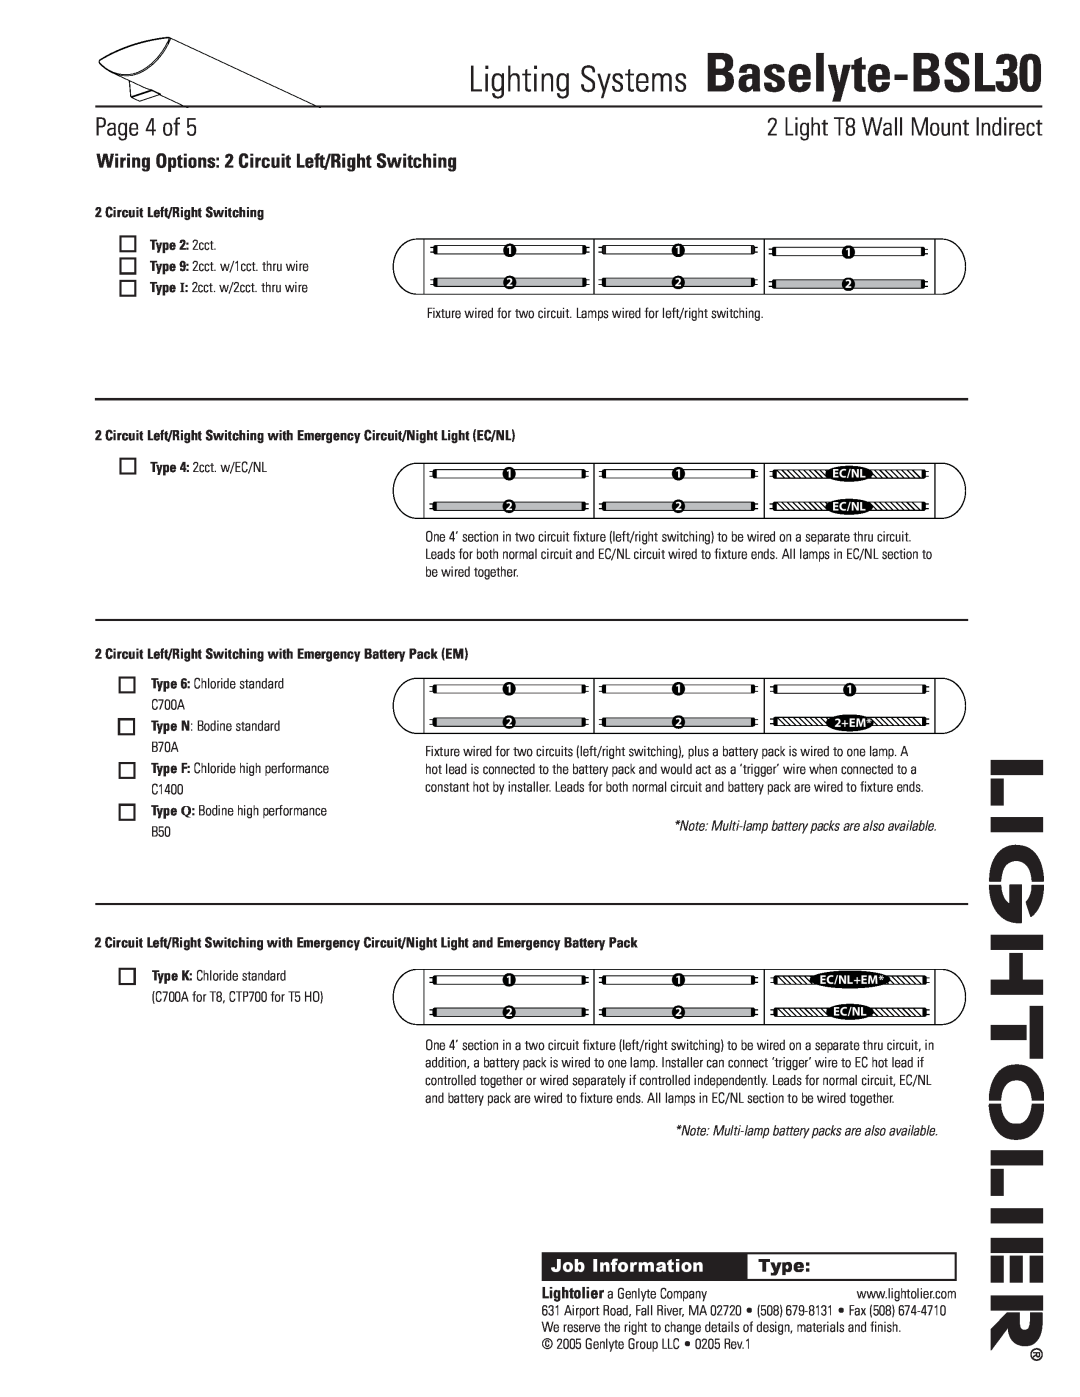 Lightolier Baselyte-BSL30 Wiring Options 2 Circuit Left/Right Switching, Circuit Left/Right Switching Type 2 2cct, Page of 